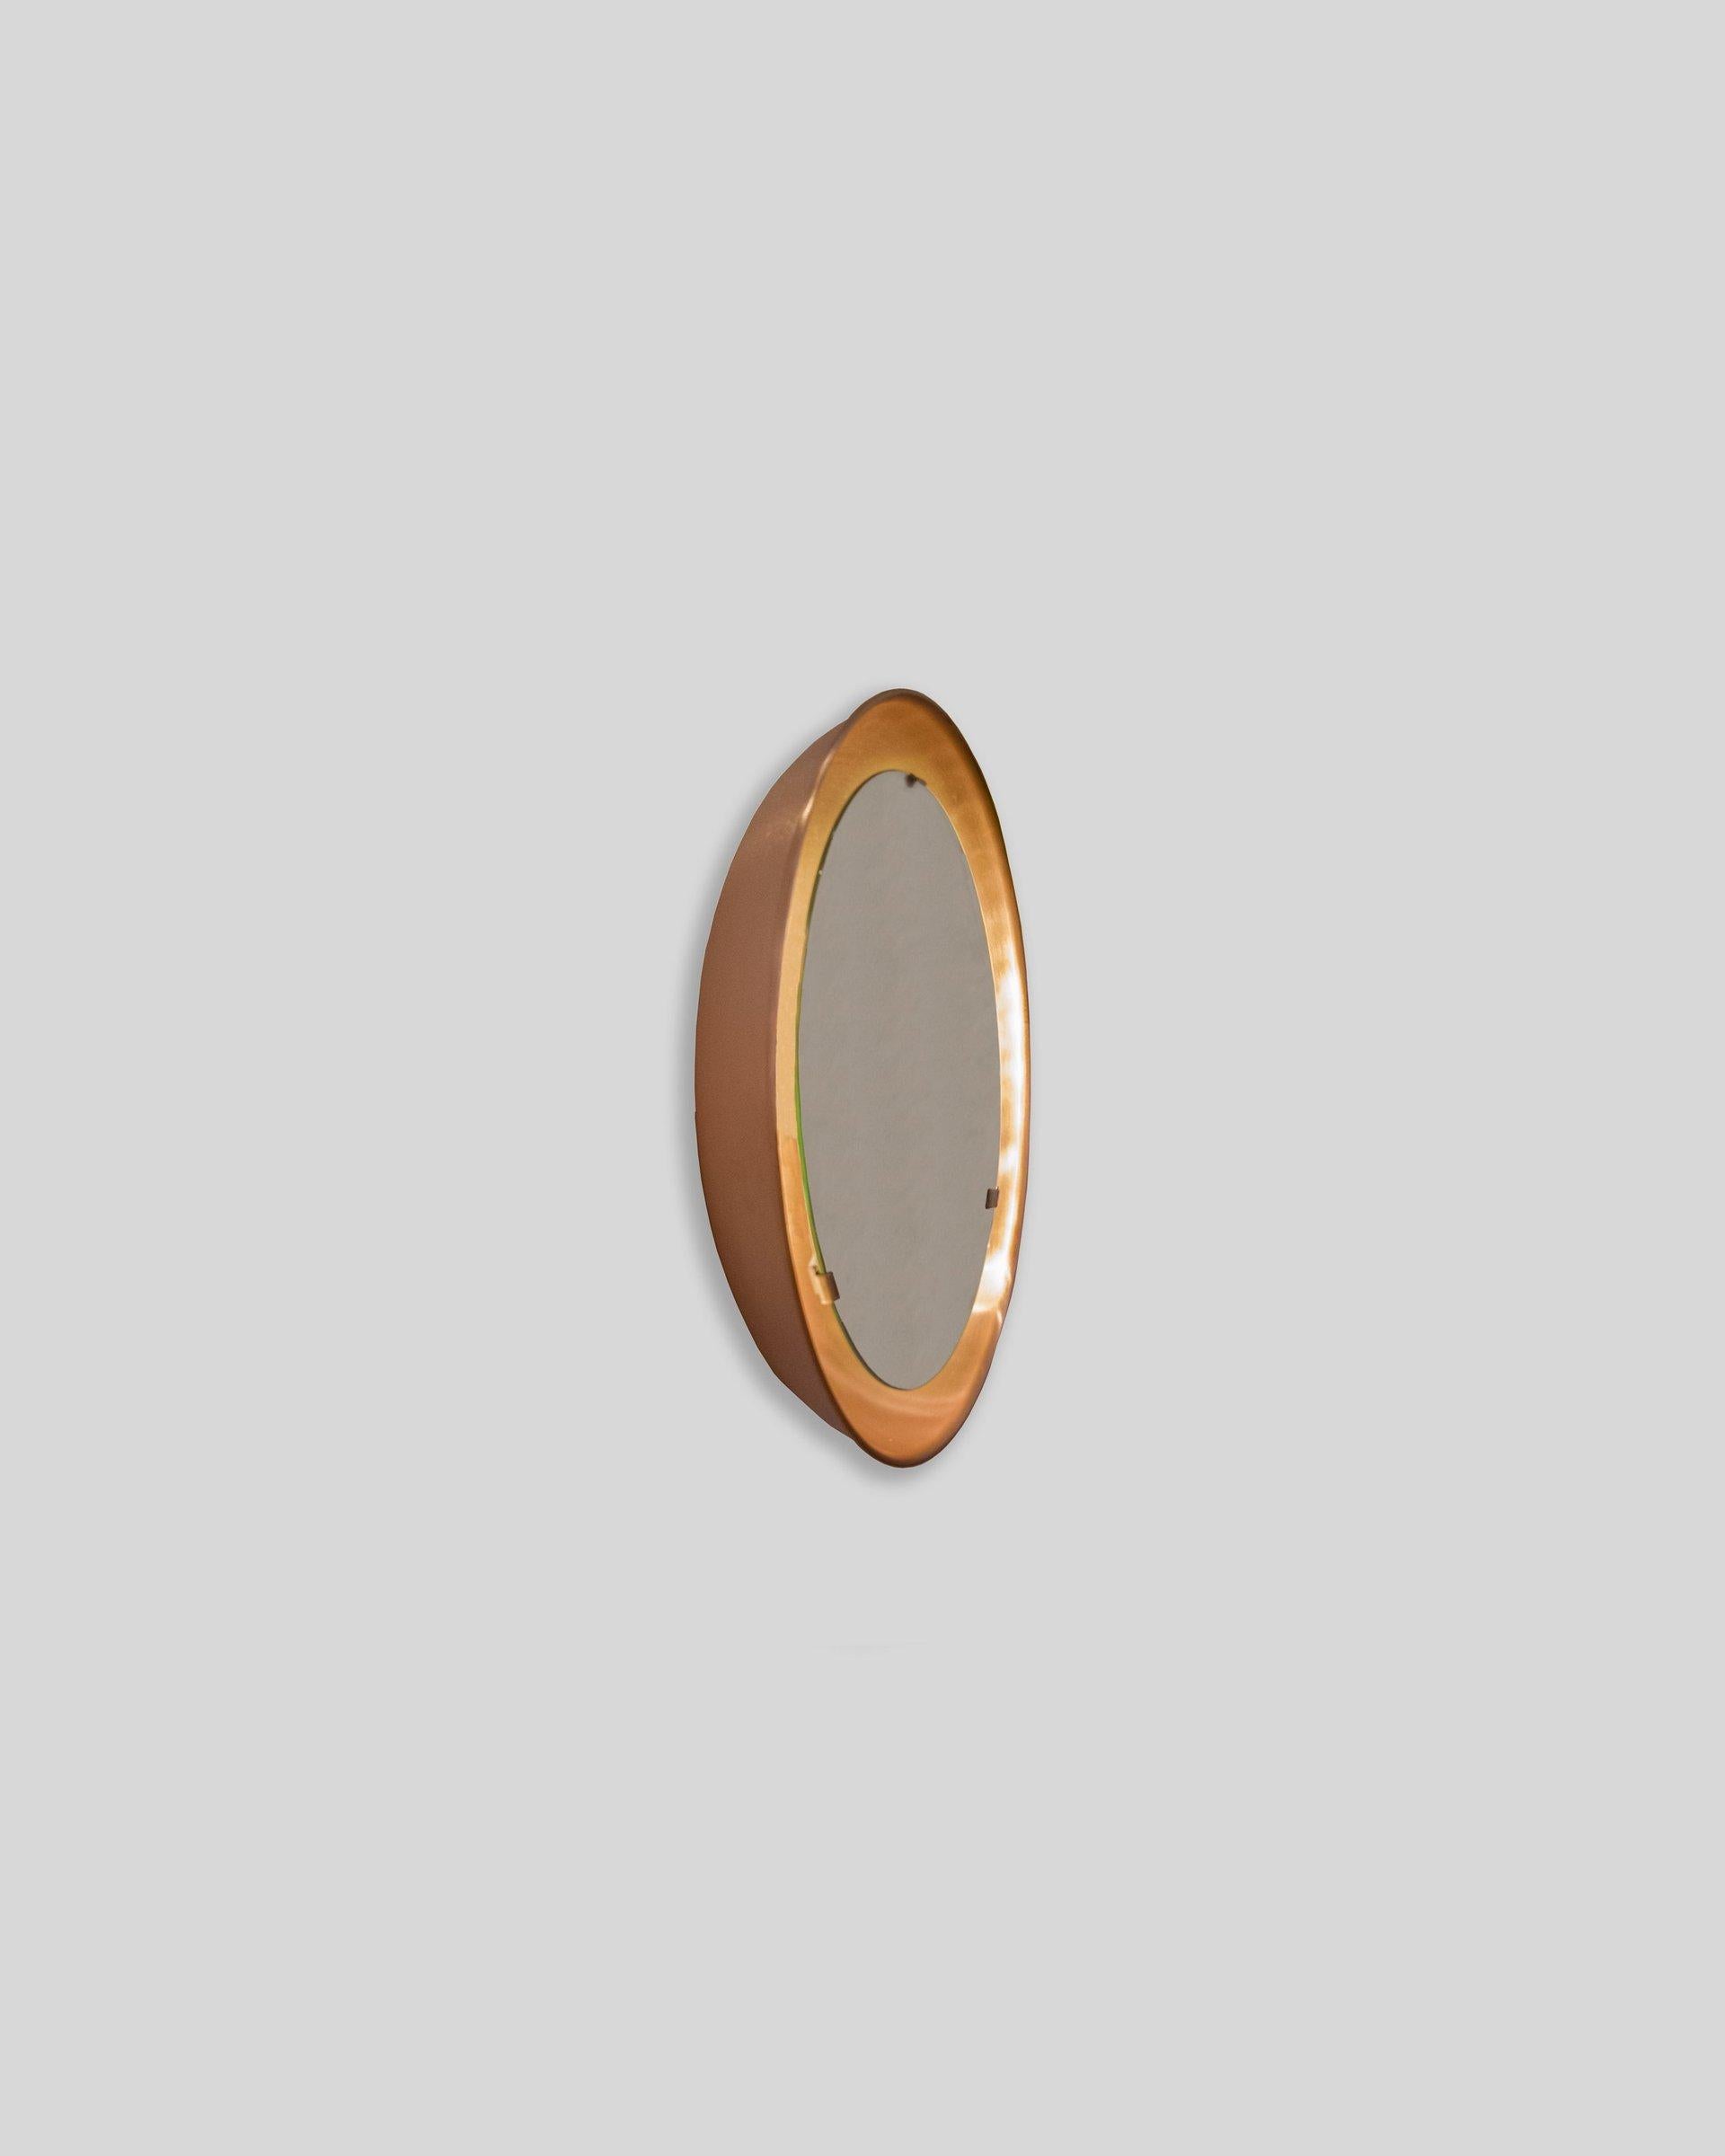 Created in the late 1930s, the PH mirror features backlit illumination that provides a reflection that is free from shadows and glare. PH’s wall mounted mirror design fits harmoniously with the widest variety of interior settings – from the grandest